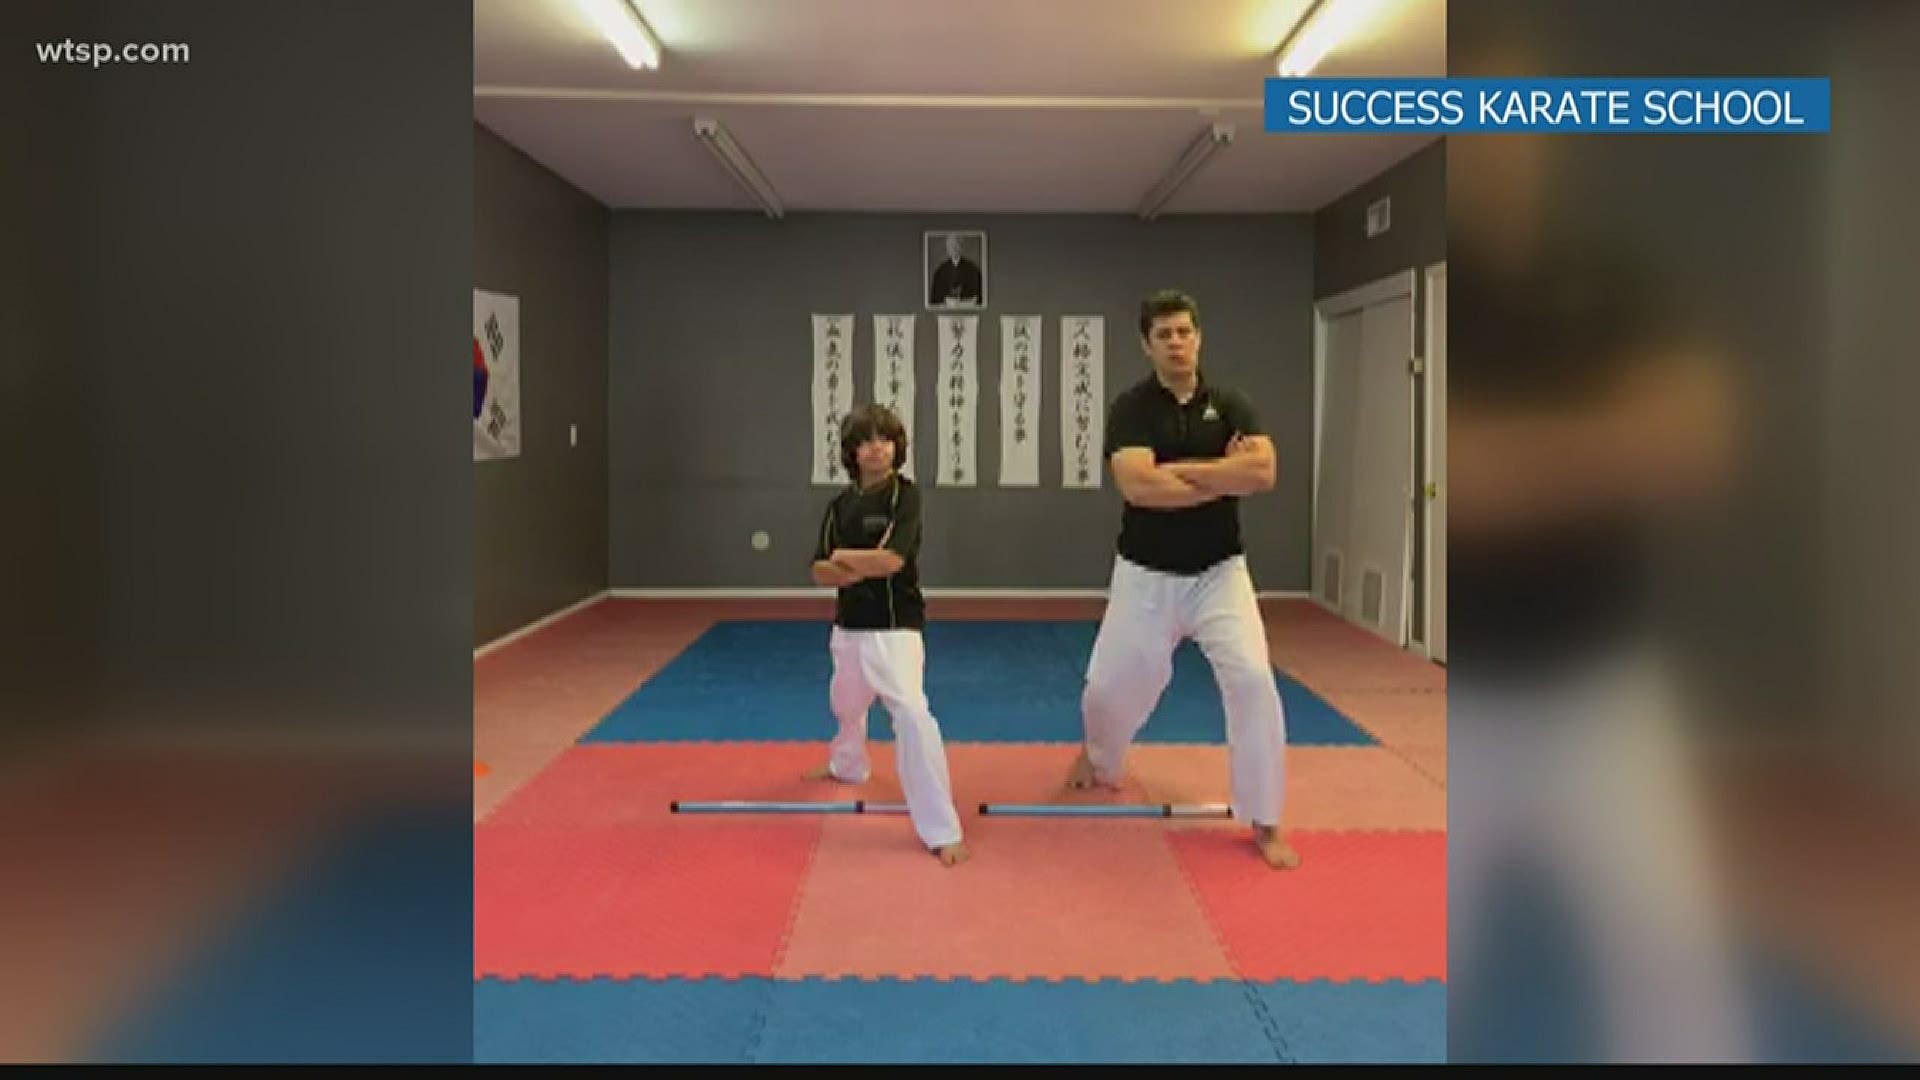 Success Karate School came up with a creative way for everyone to stay in but stay active amid the coronavirus pandemic.